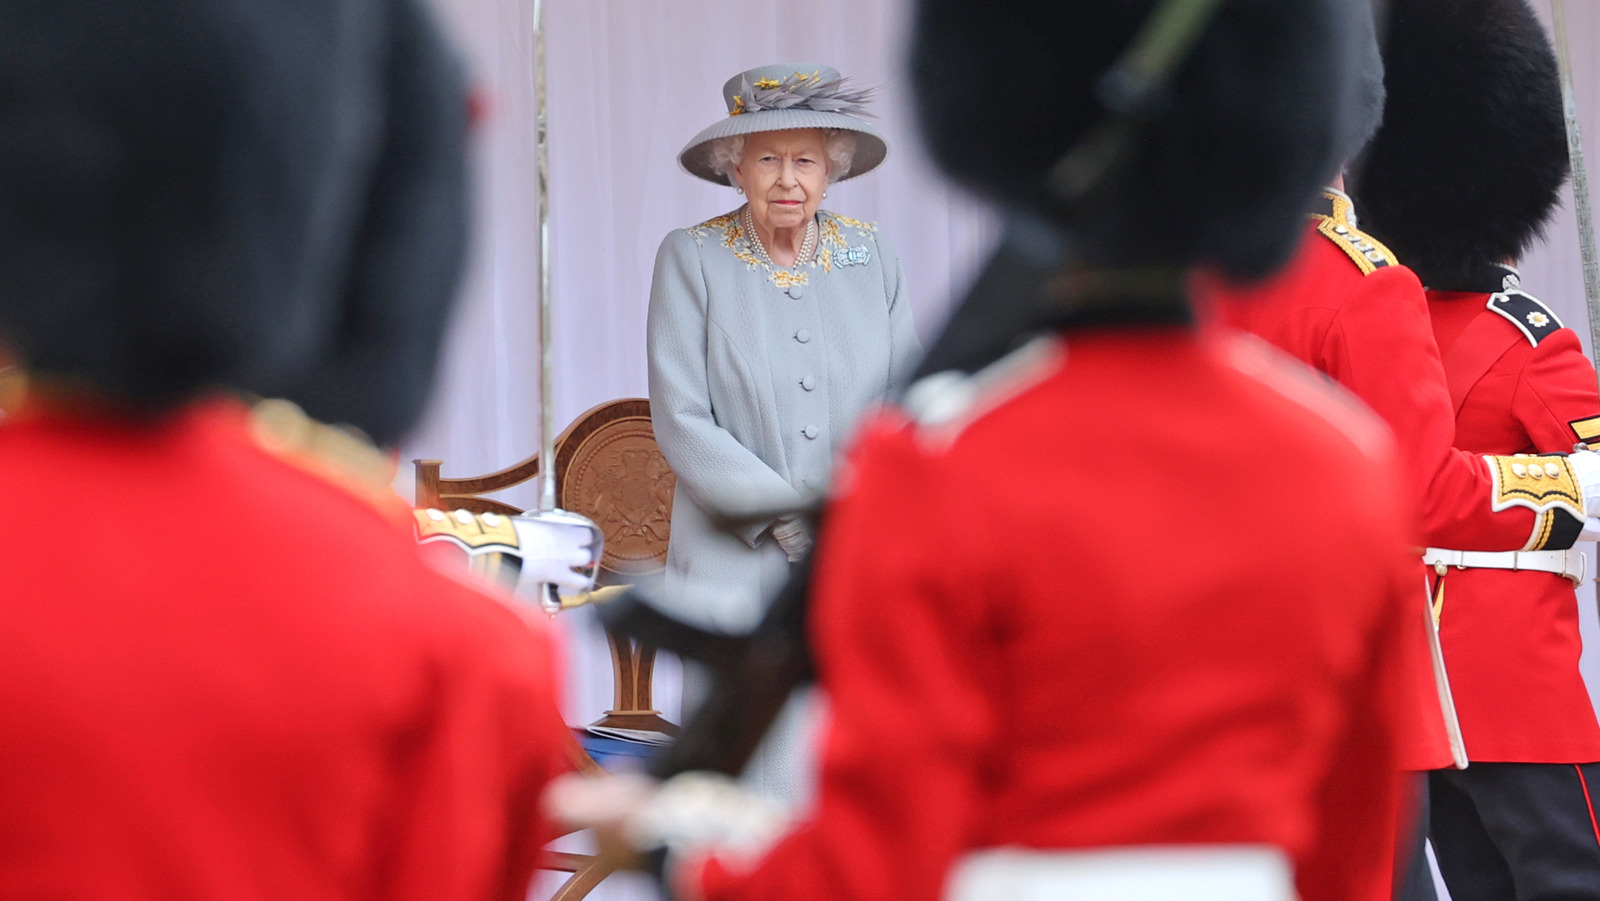 Who Was With Queen Elizabeth At Her Birthday Parade?